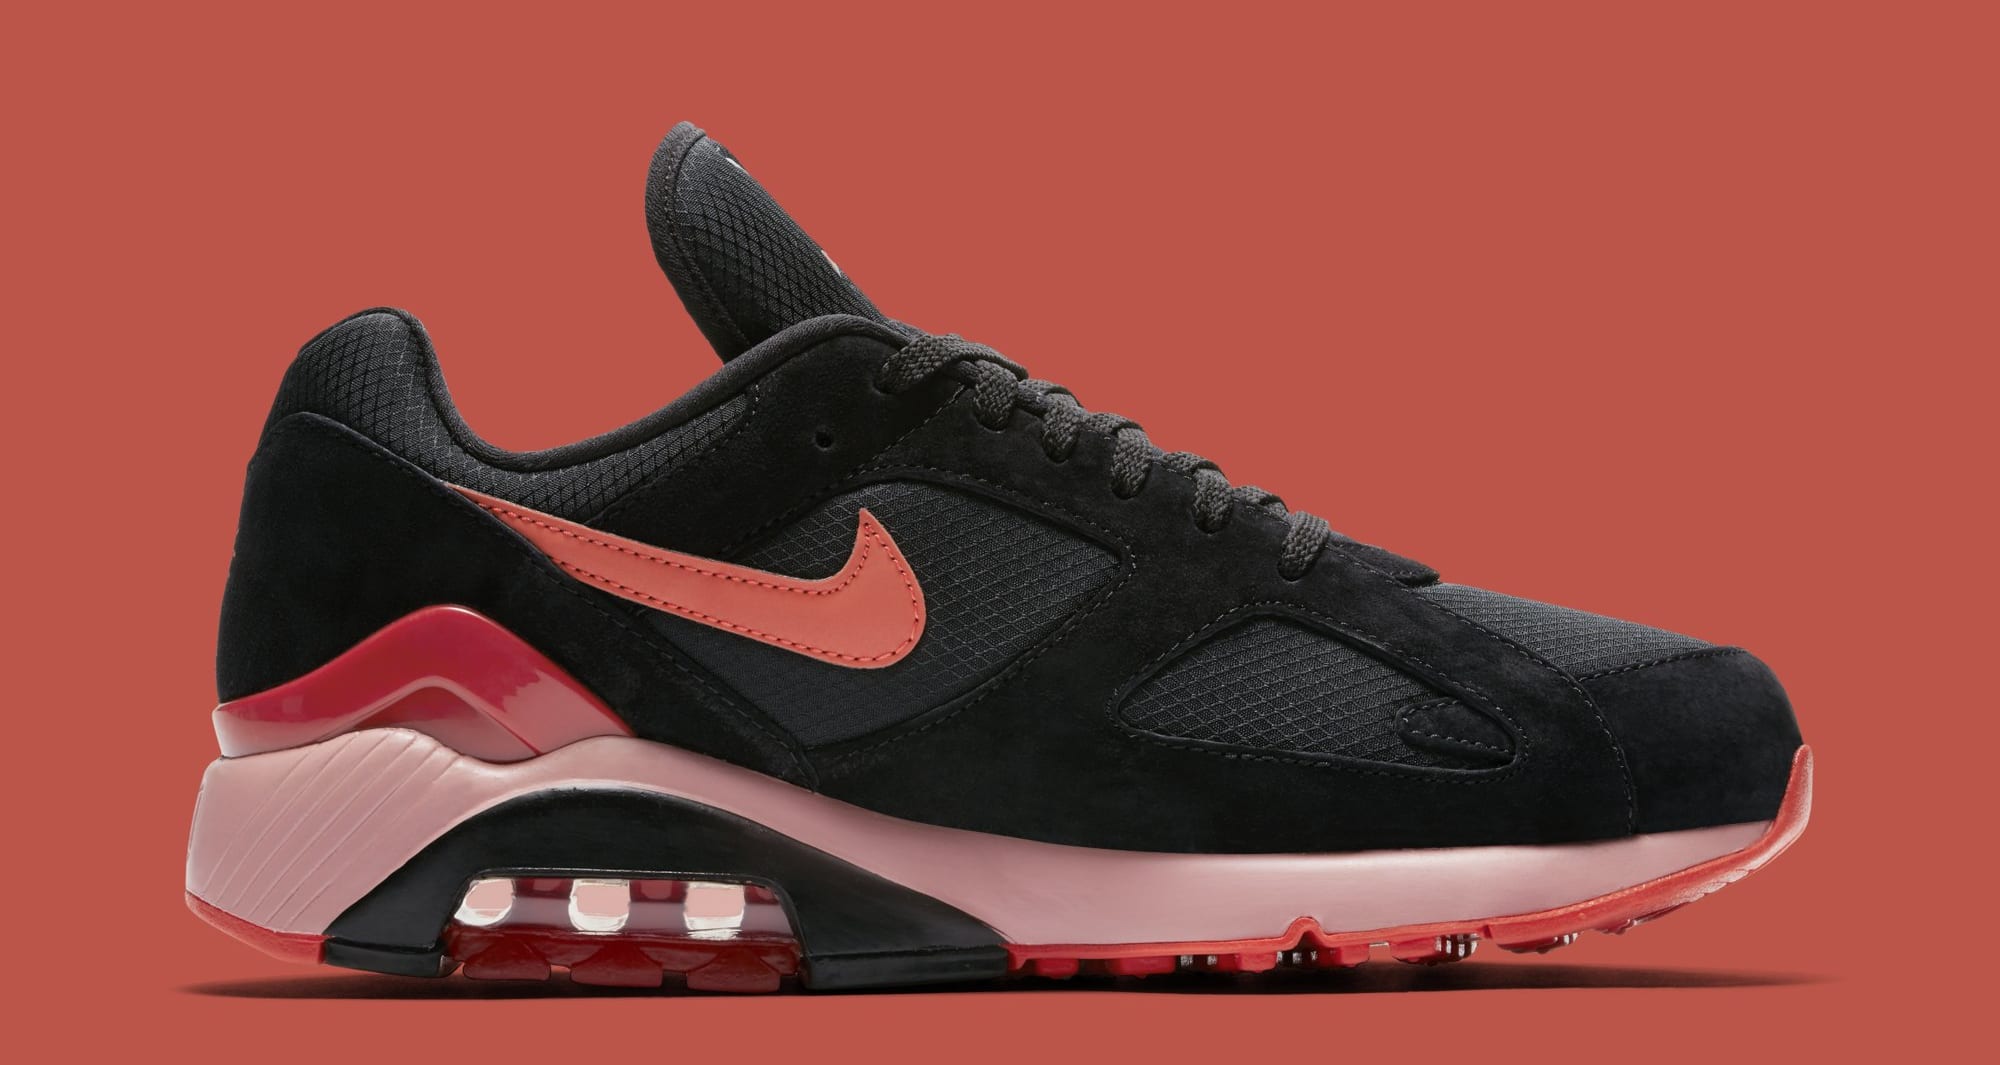 Nike Air Max Orange/University Red' Release Date | Collector